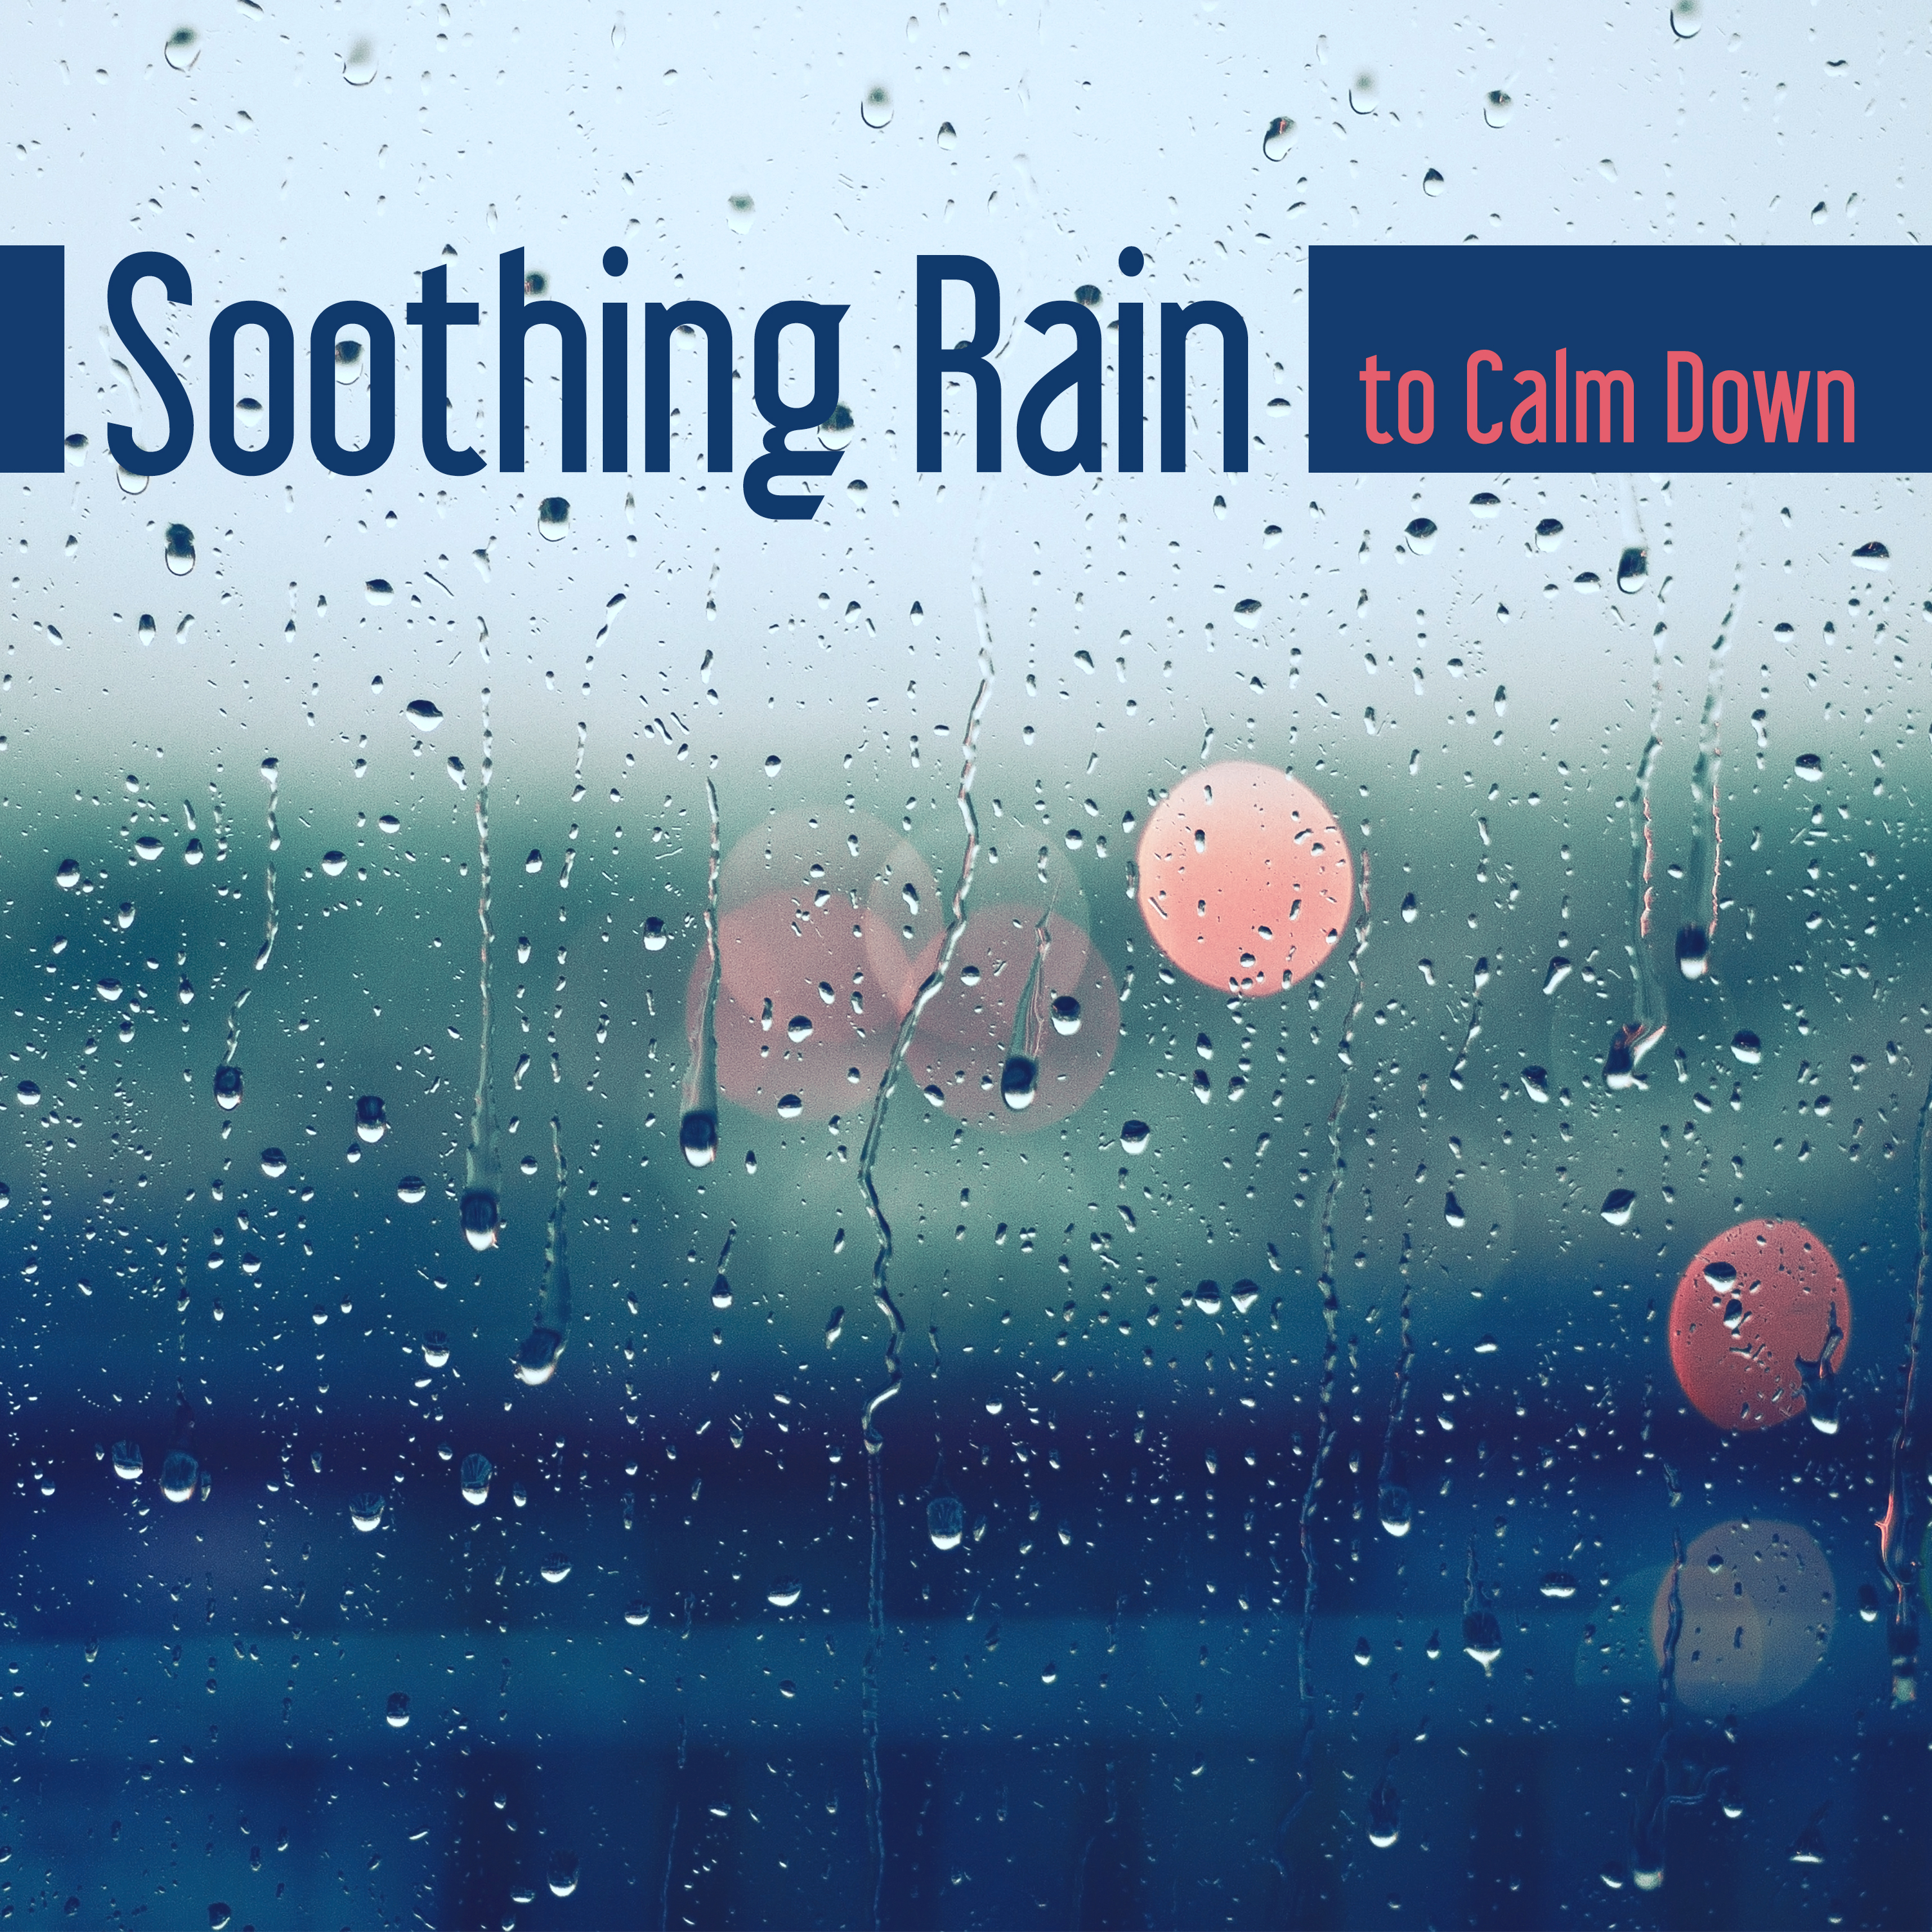 Soothing Rain to Calm Down – Peaceful Mind & Body, No More Stress, Time to Rest & Relax